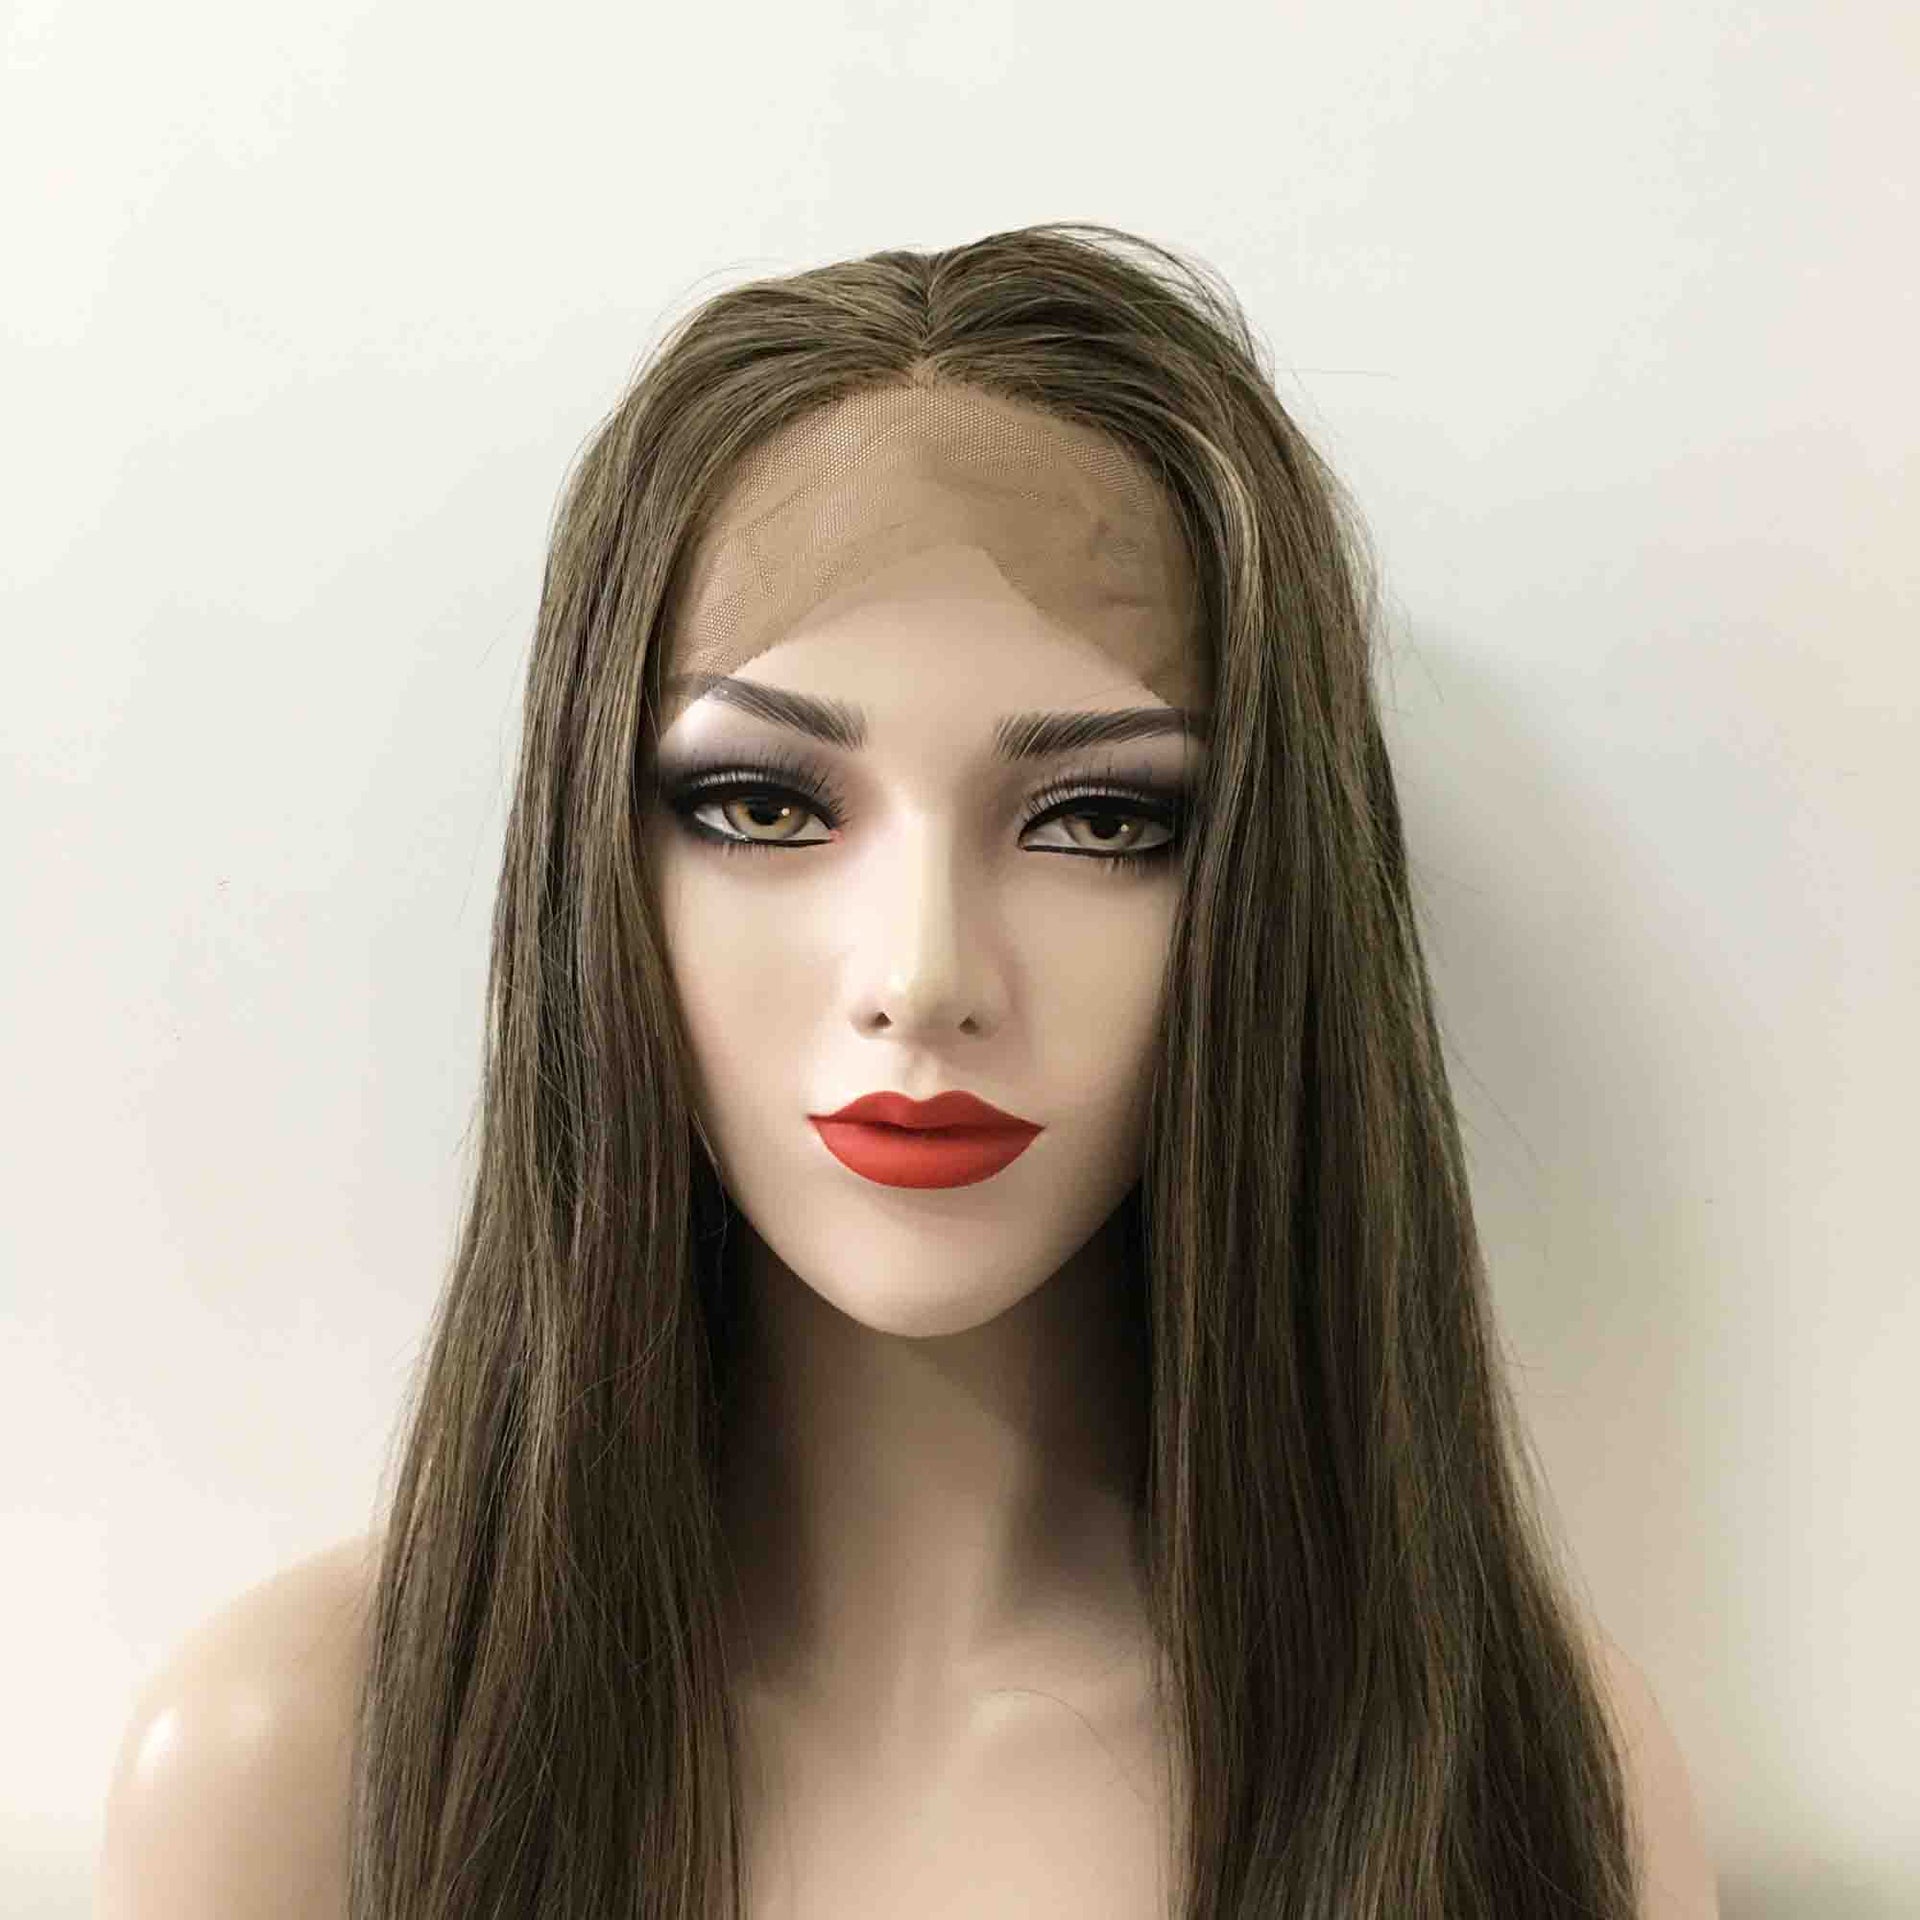 nevermindyrhead Women Lace Front Very Dark Brown Ash Blonde Highlight Long Straight Middle Part Wig